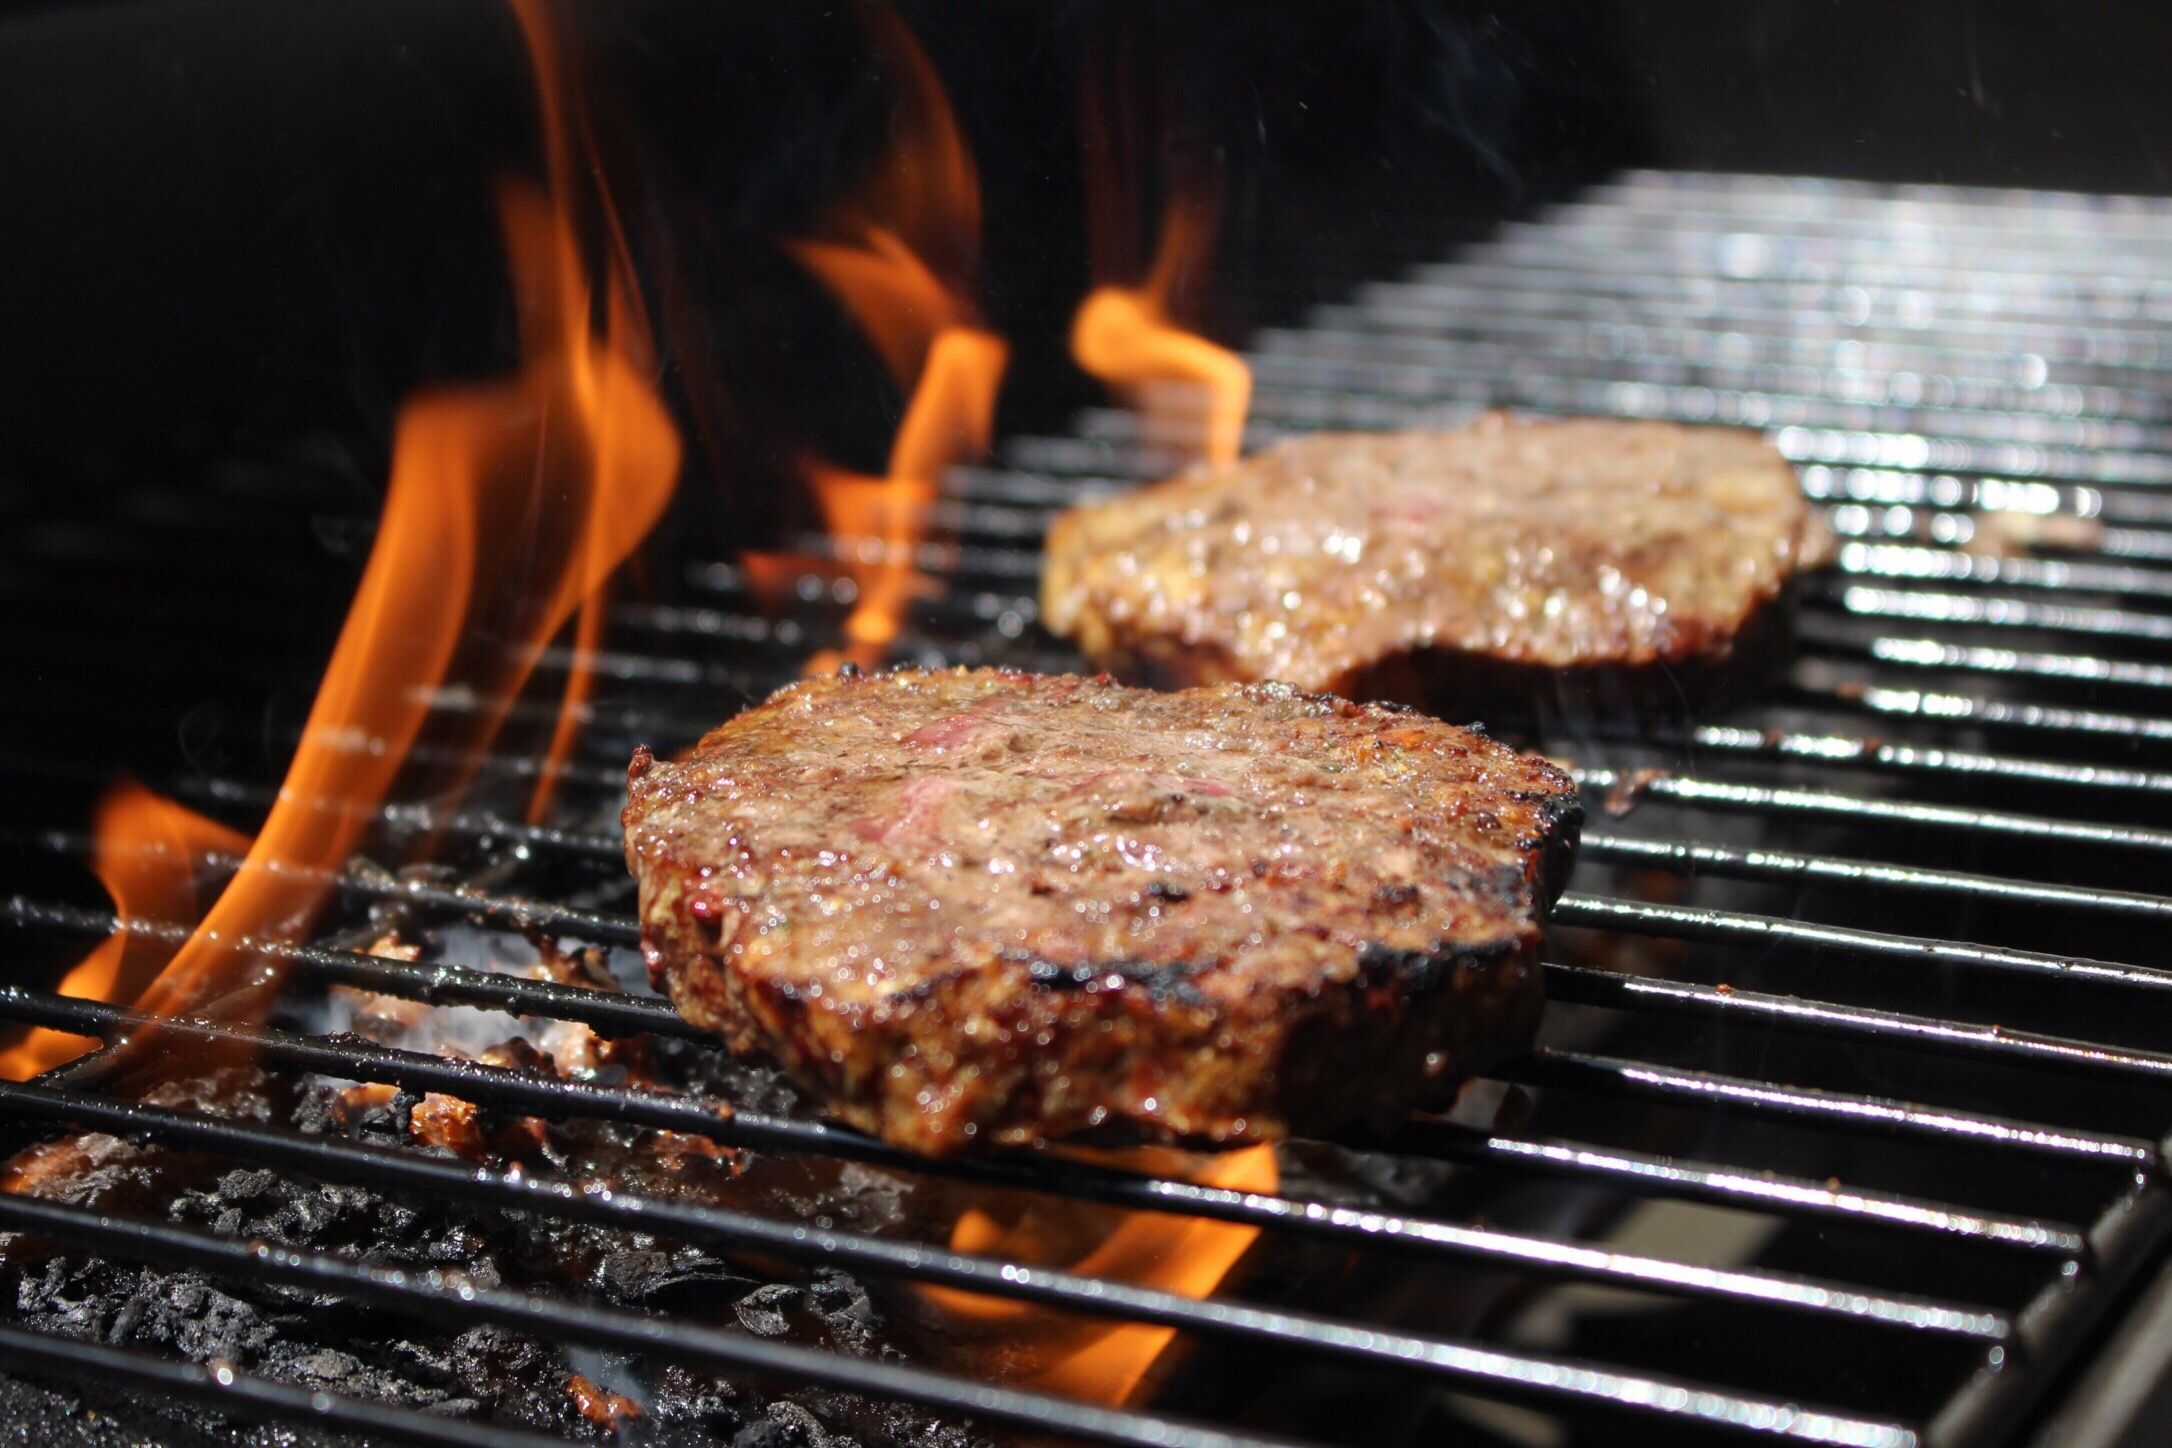 How long do you grill burgers at 300? - Foodly